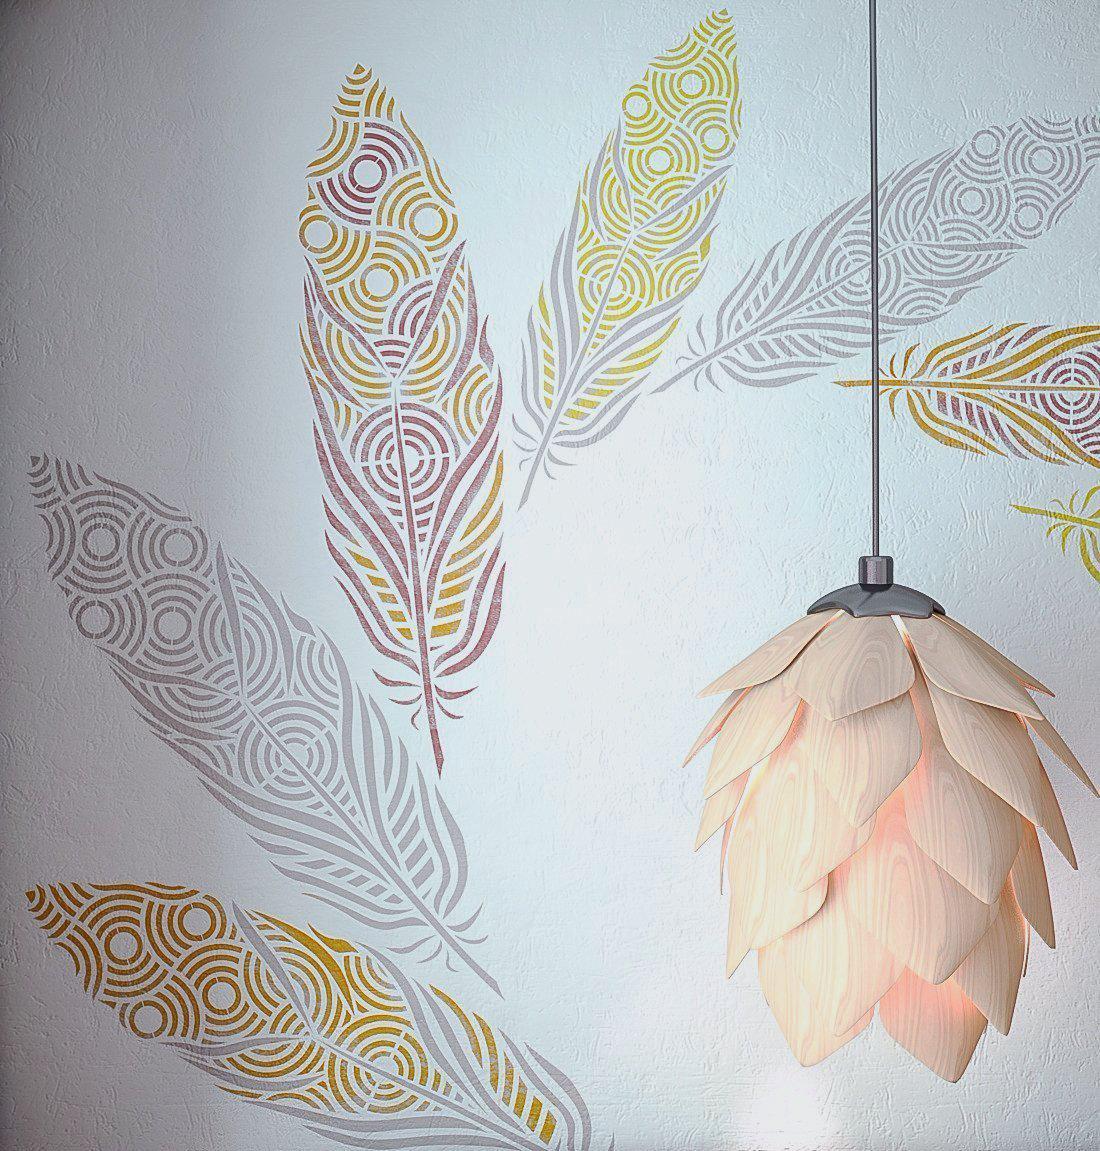 How to Paint a Boho Wall with a Stencil